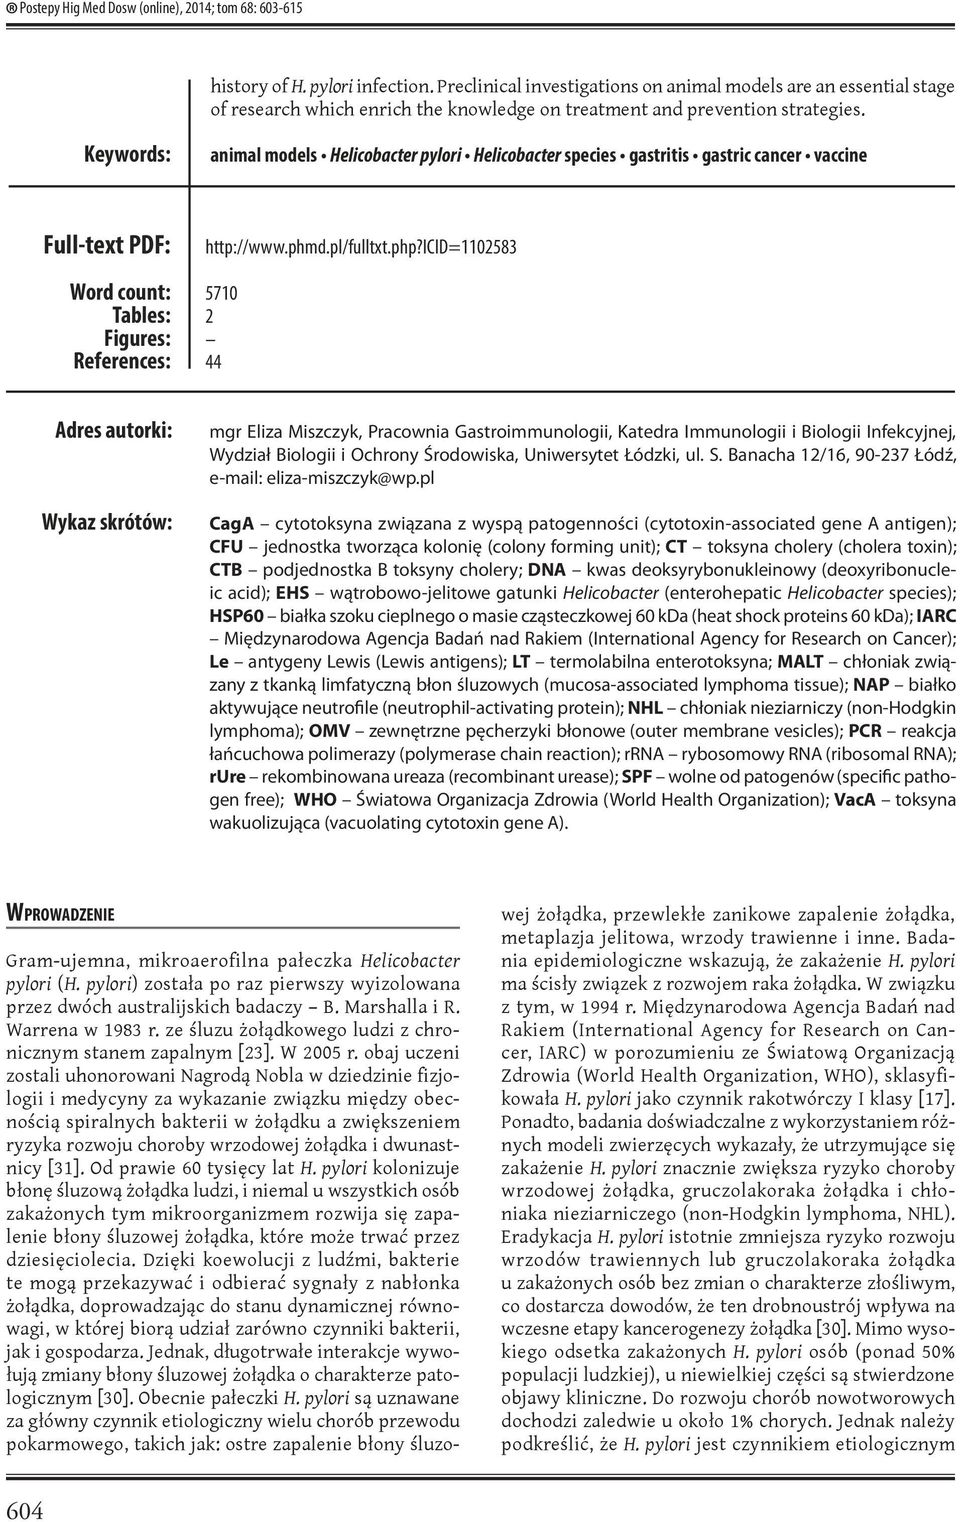 Keywords: animal models Helicobacter pylori Helicobacter species gastritis gastric cancer vaccine Full-text PDF: Word count: Tables: Figures: References: http://www.phmd.pl/fulltxt.php?